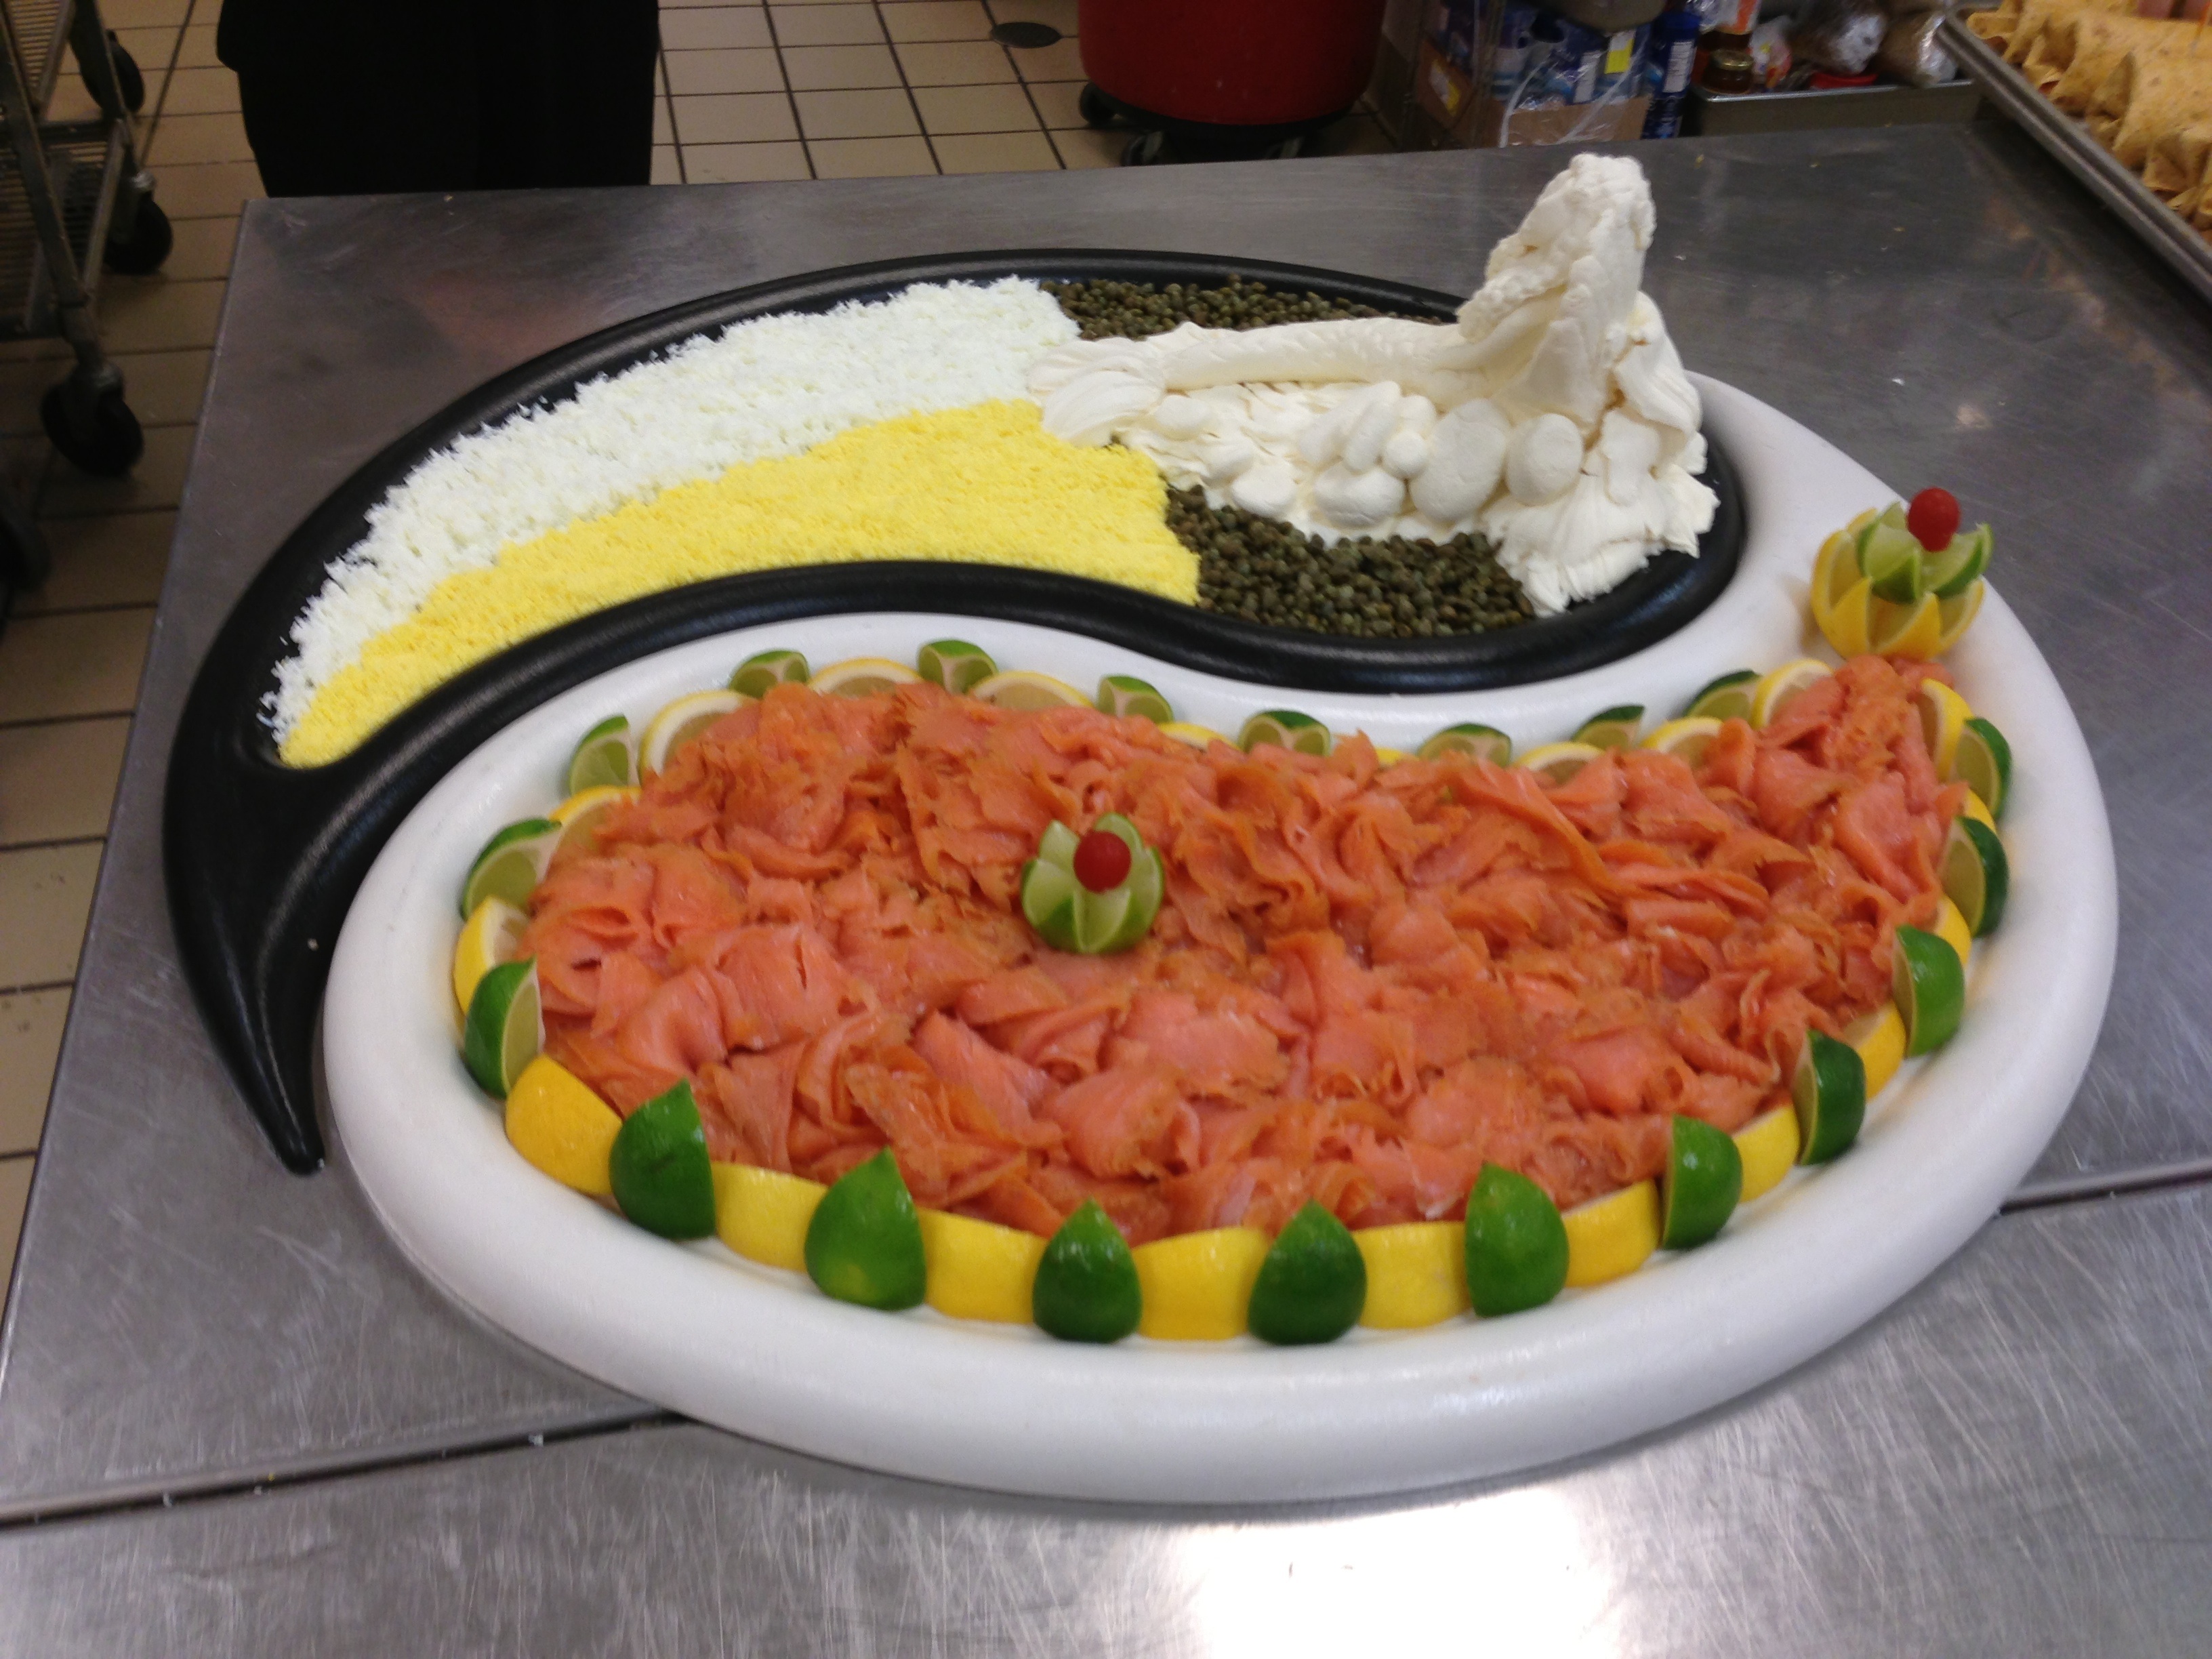 Lox and Cream Cheese Sculpture